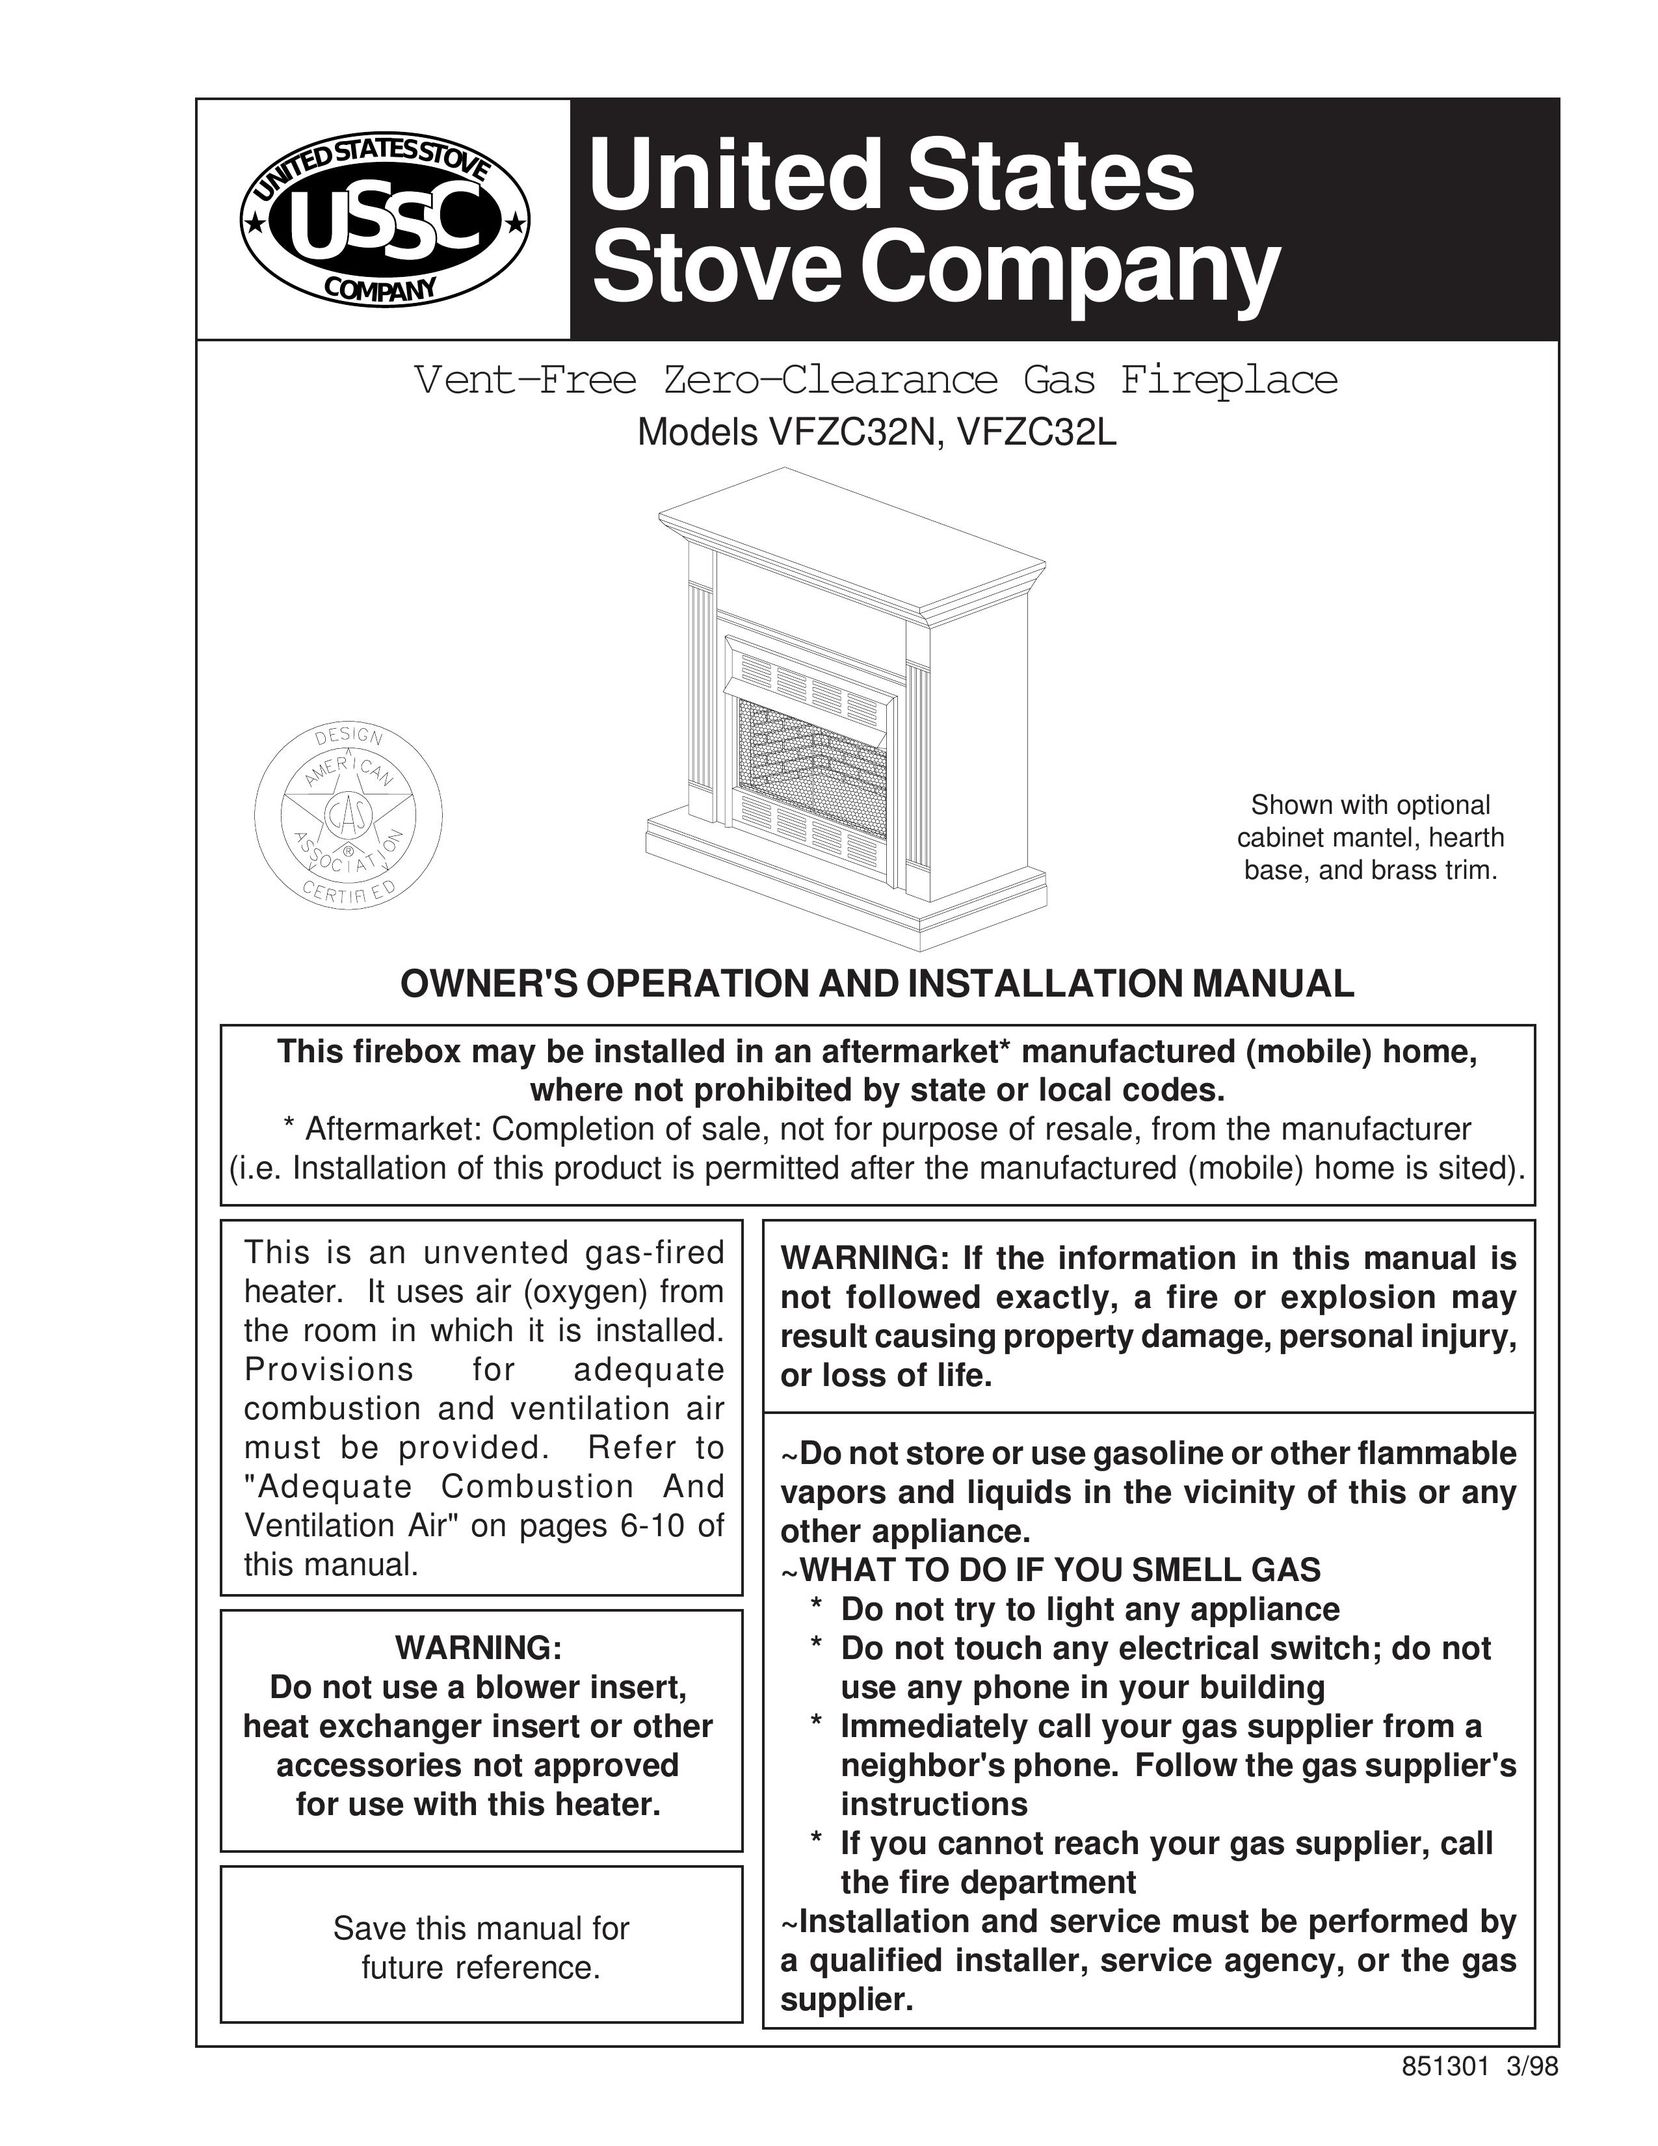 United States Stove VFZC32L Indoor Fireplace User Manual